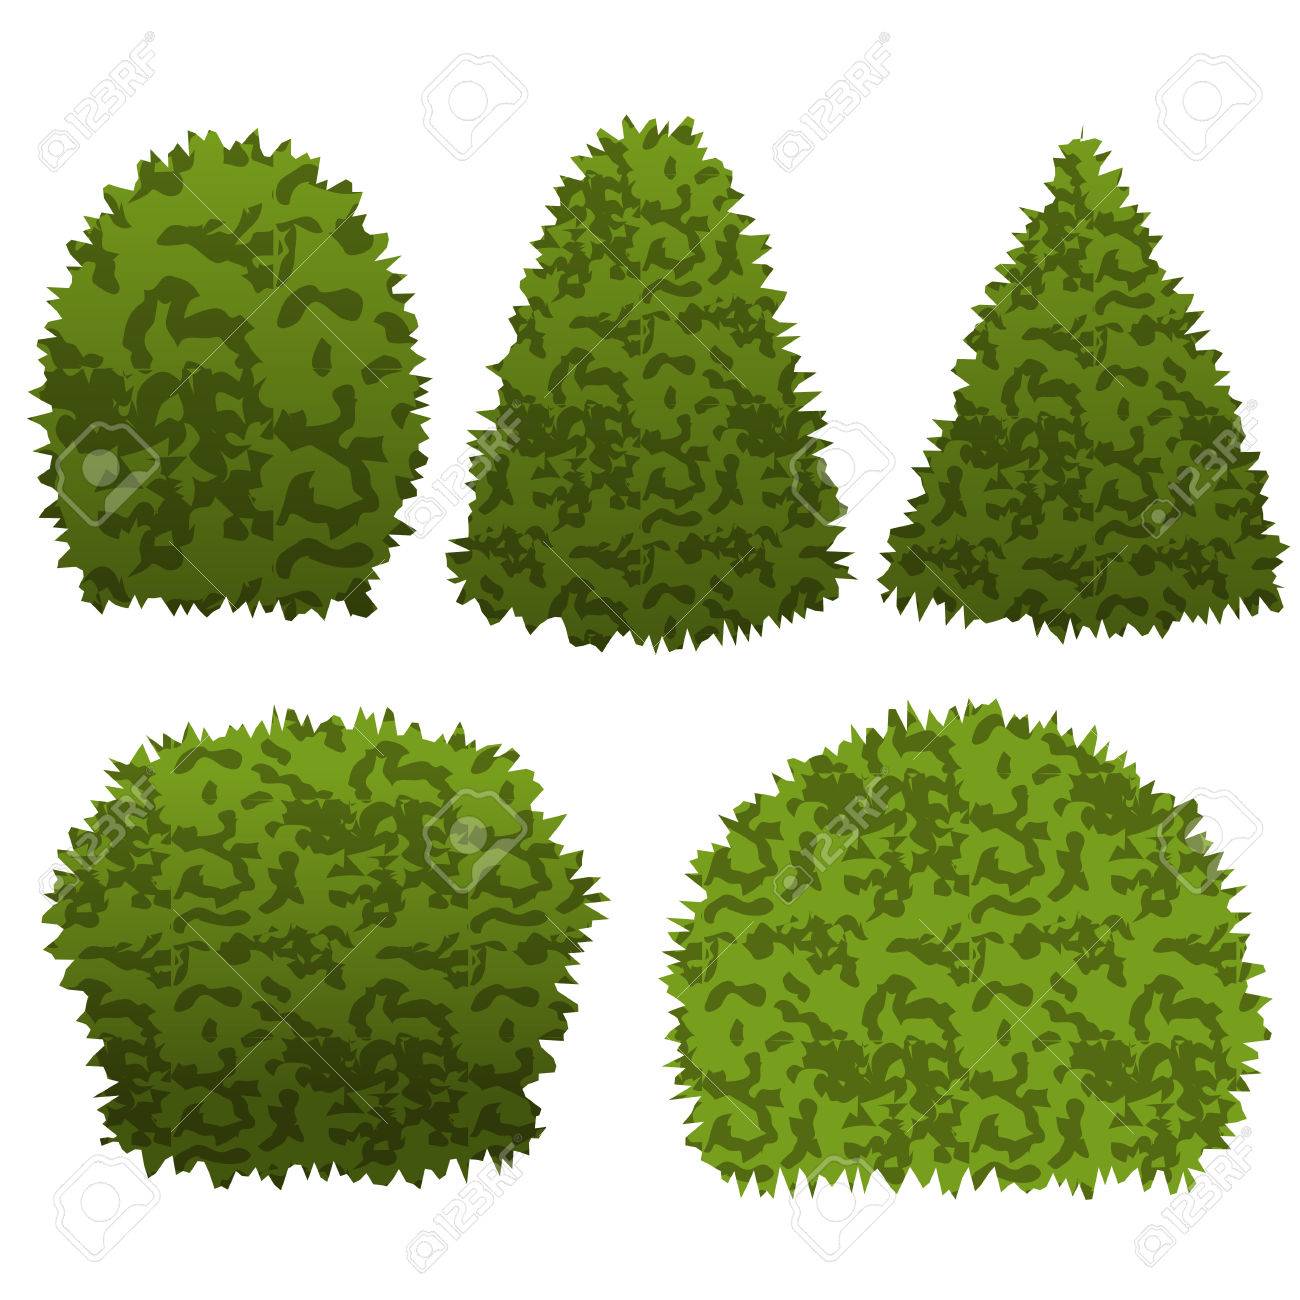 Set of garden bushes. Isolated vector bushes can be used to construct  topiary garden scene